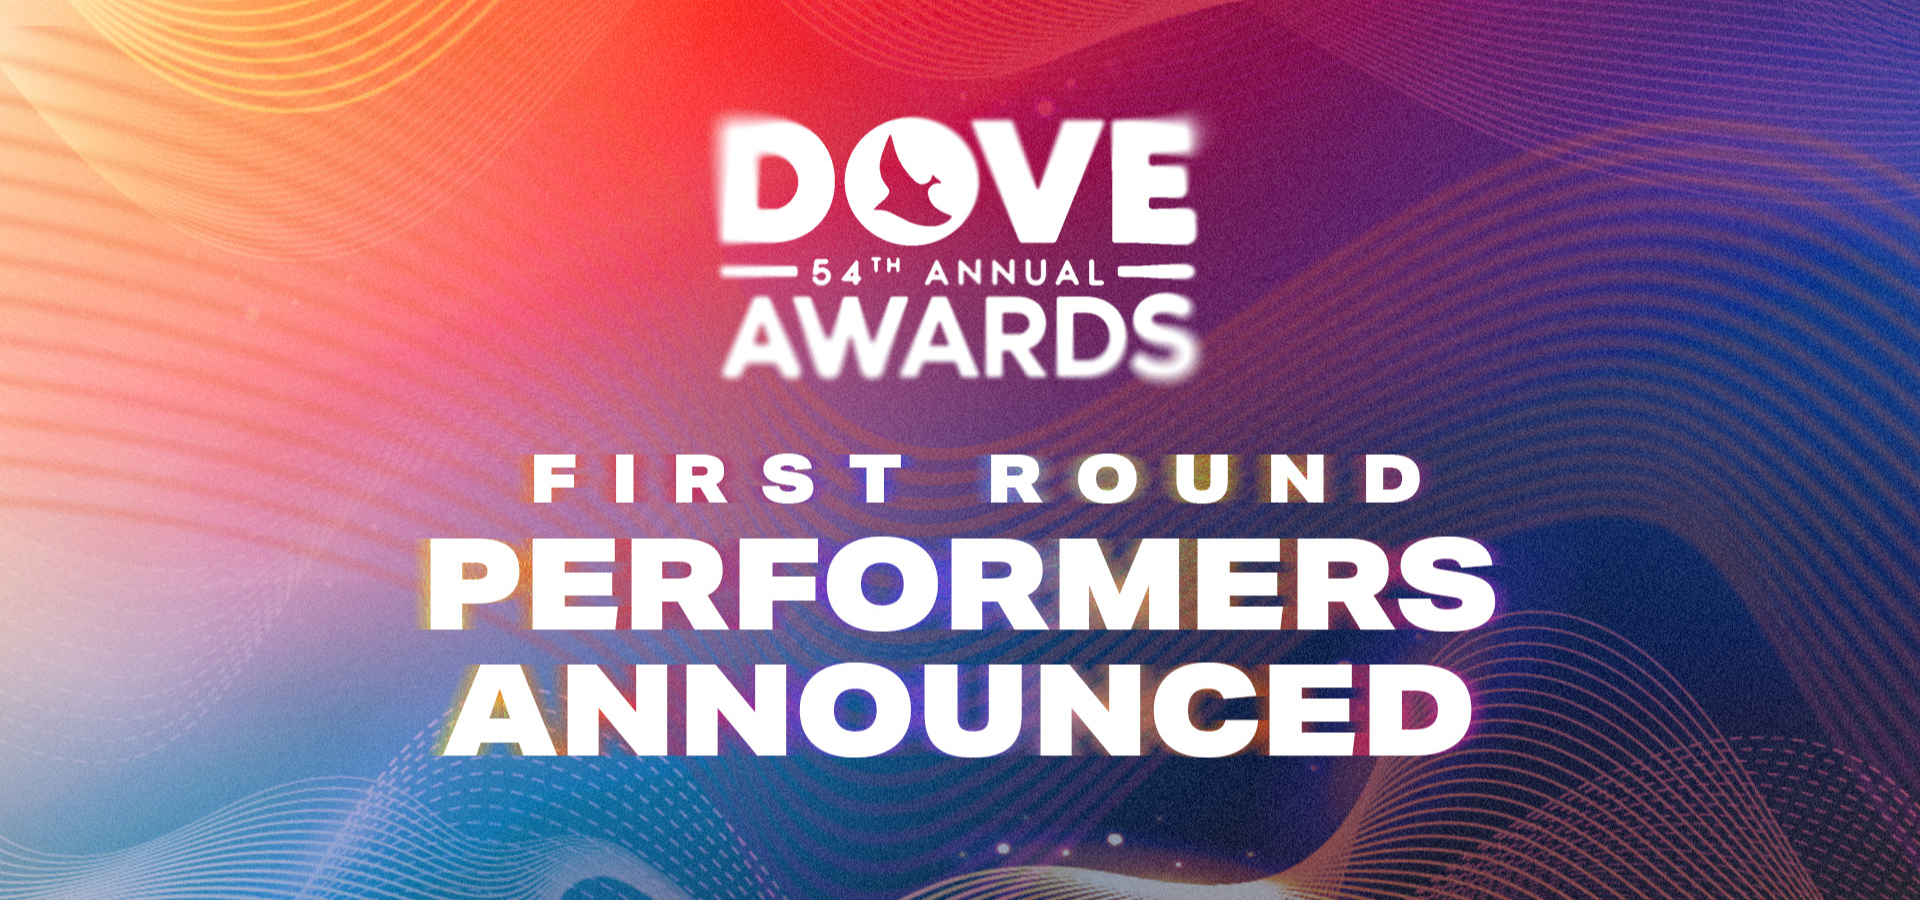 The 54th Annual GMA Dove Awards Announce First Round Of Performers